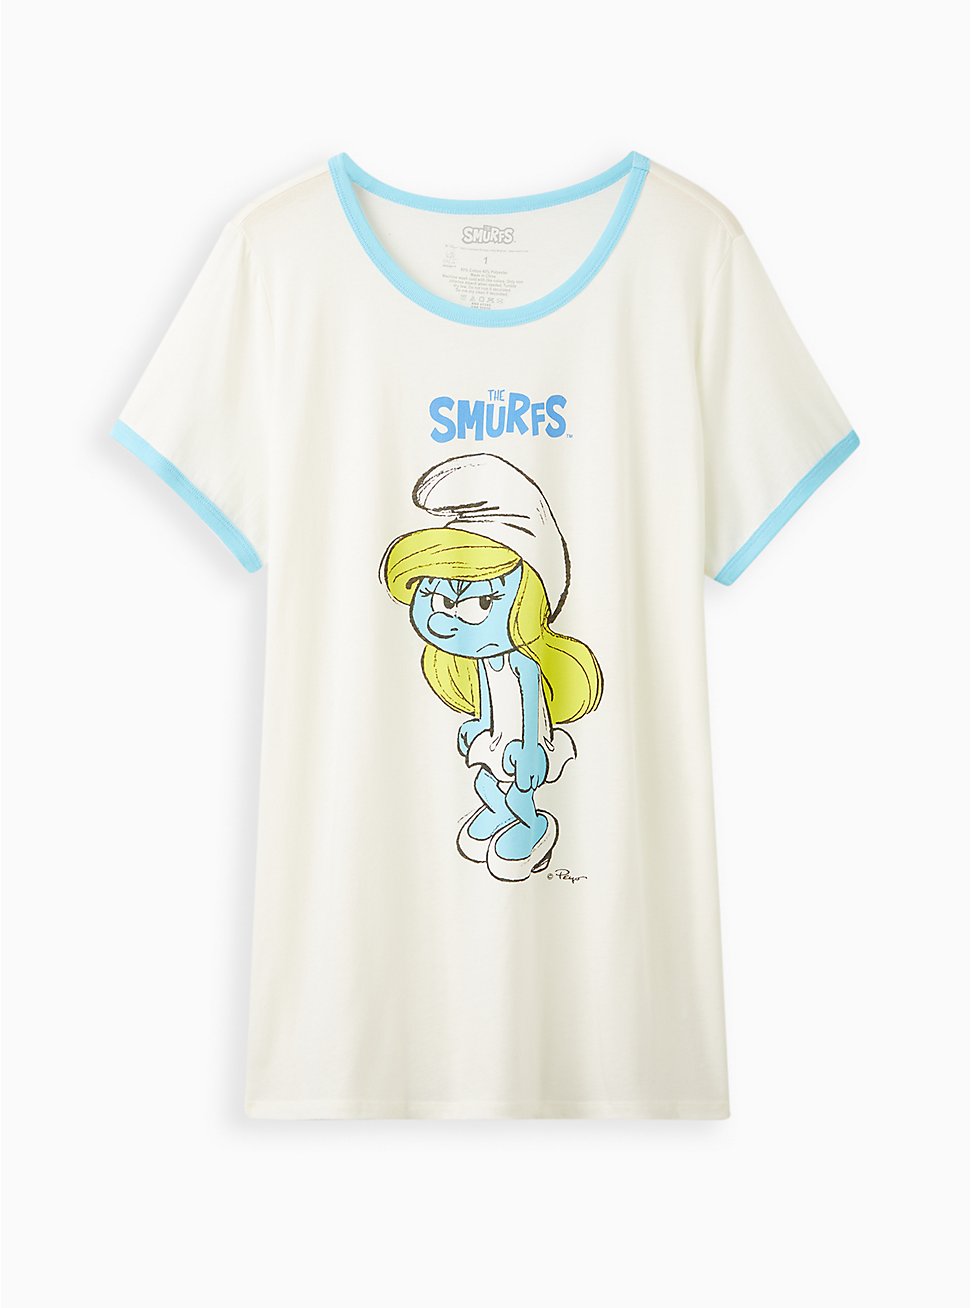 Classic Fit Ringer Tee - The Smurfs Ivory, MARSHMALLOW, hi-res